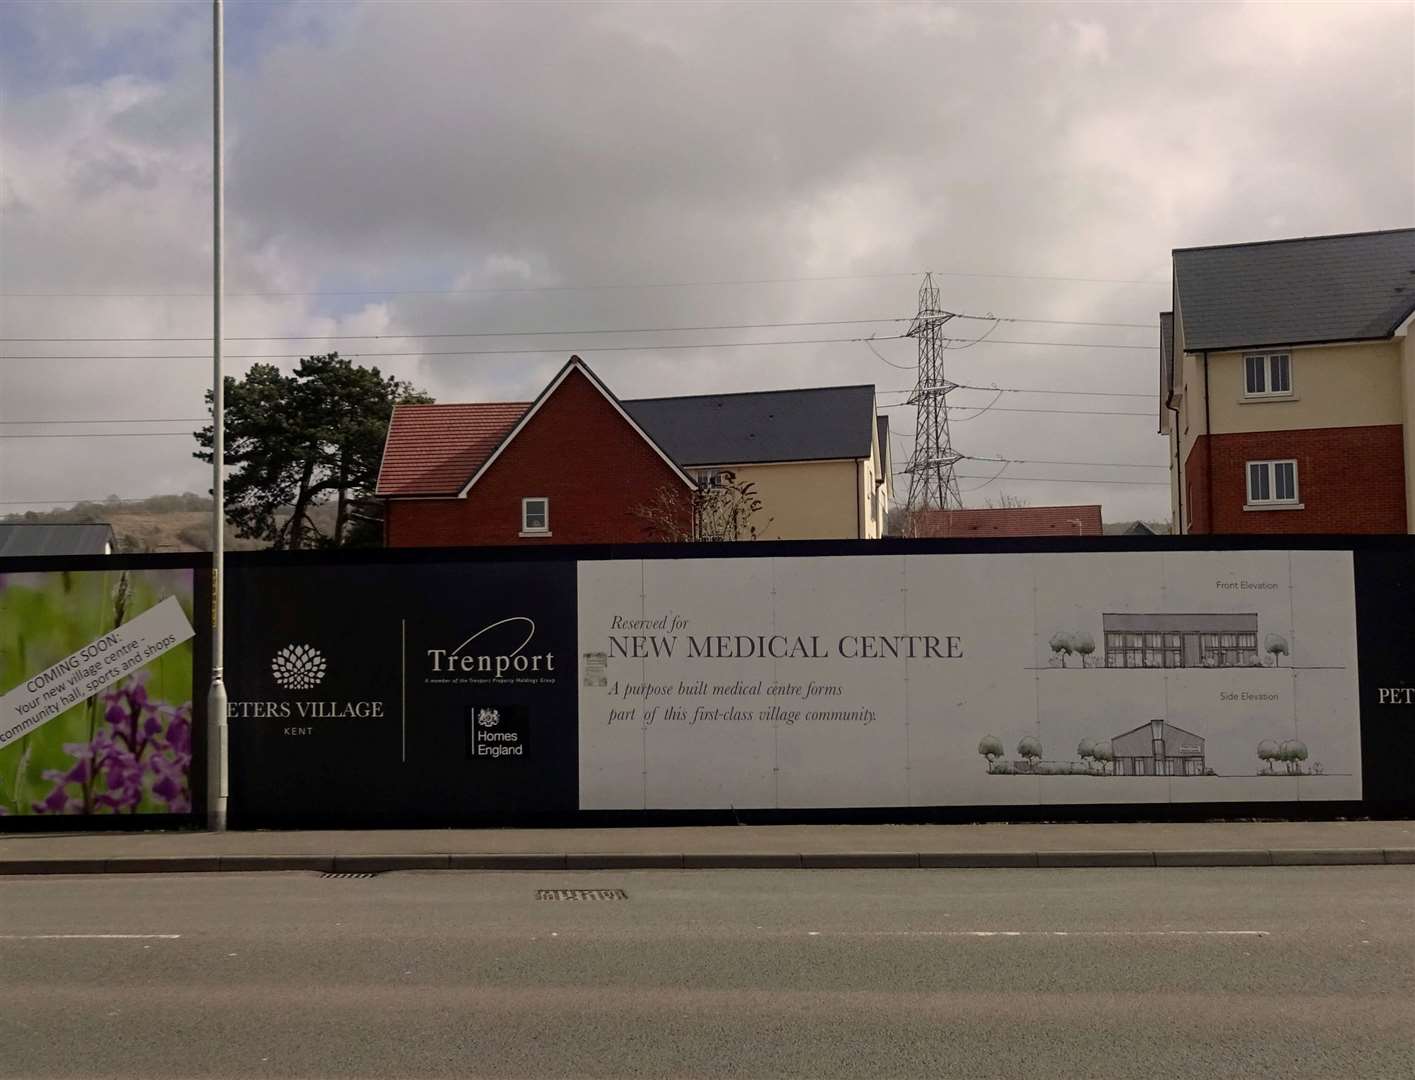 The site for the medical centre has not progressed behind the hoardings